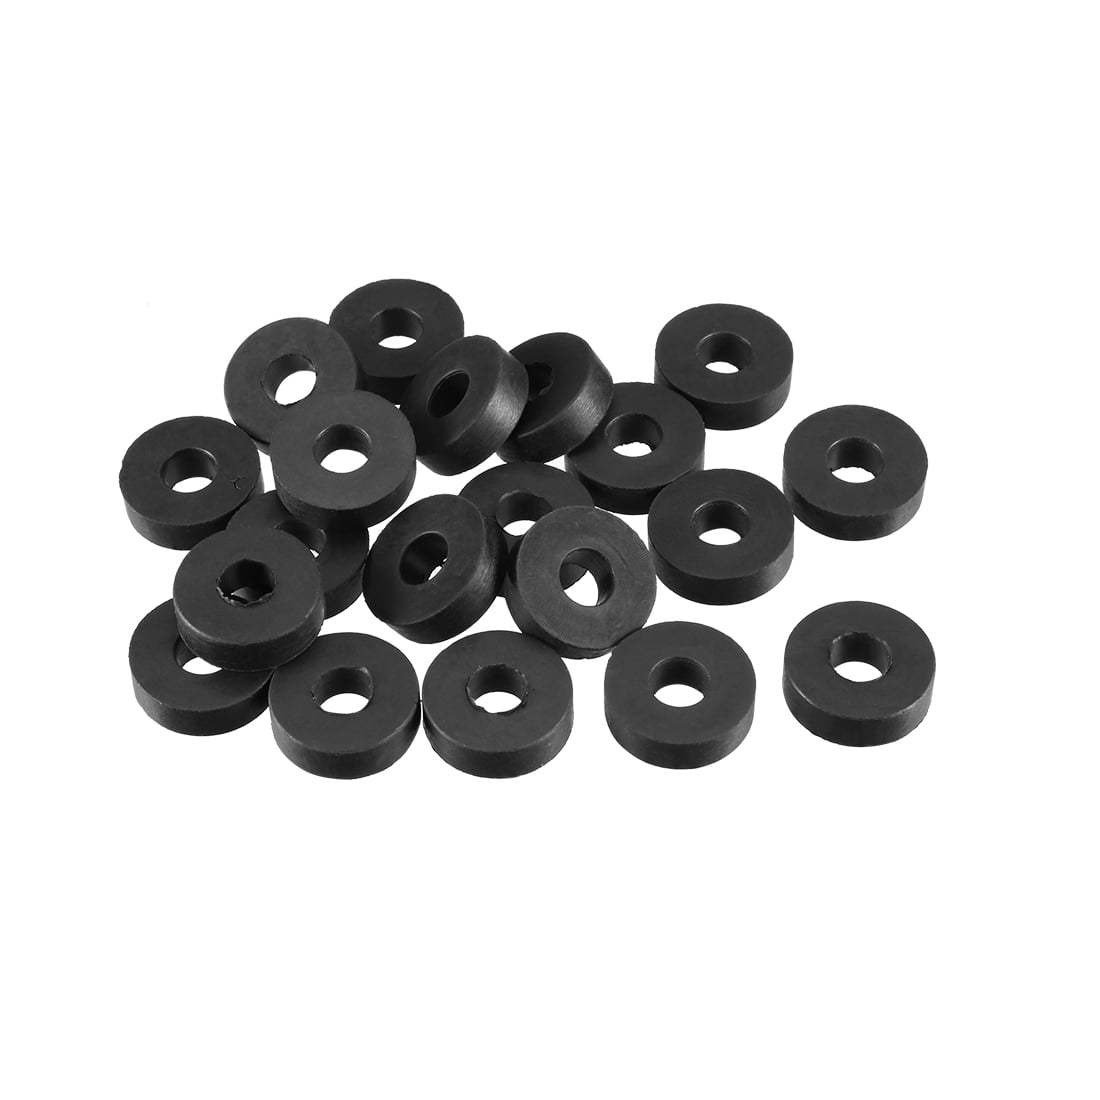 187410 Sleepers seals Tap Washers 1/2" 16,5mm with Hole VE = 3 pieces 572 